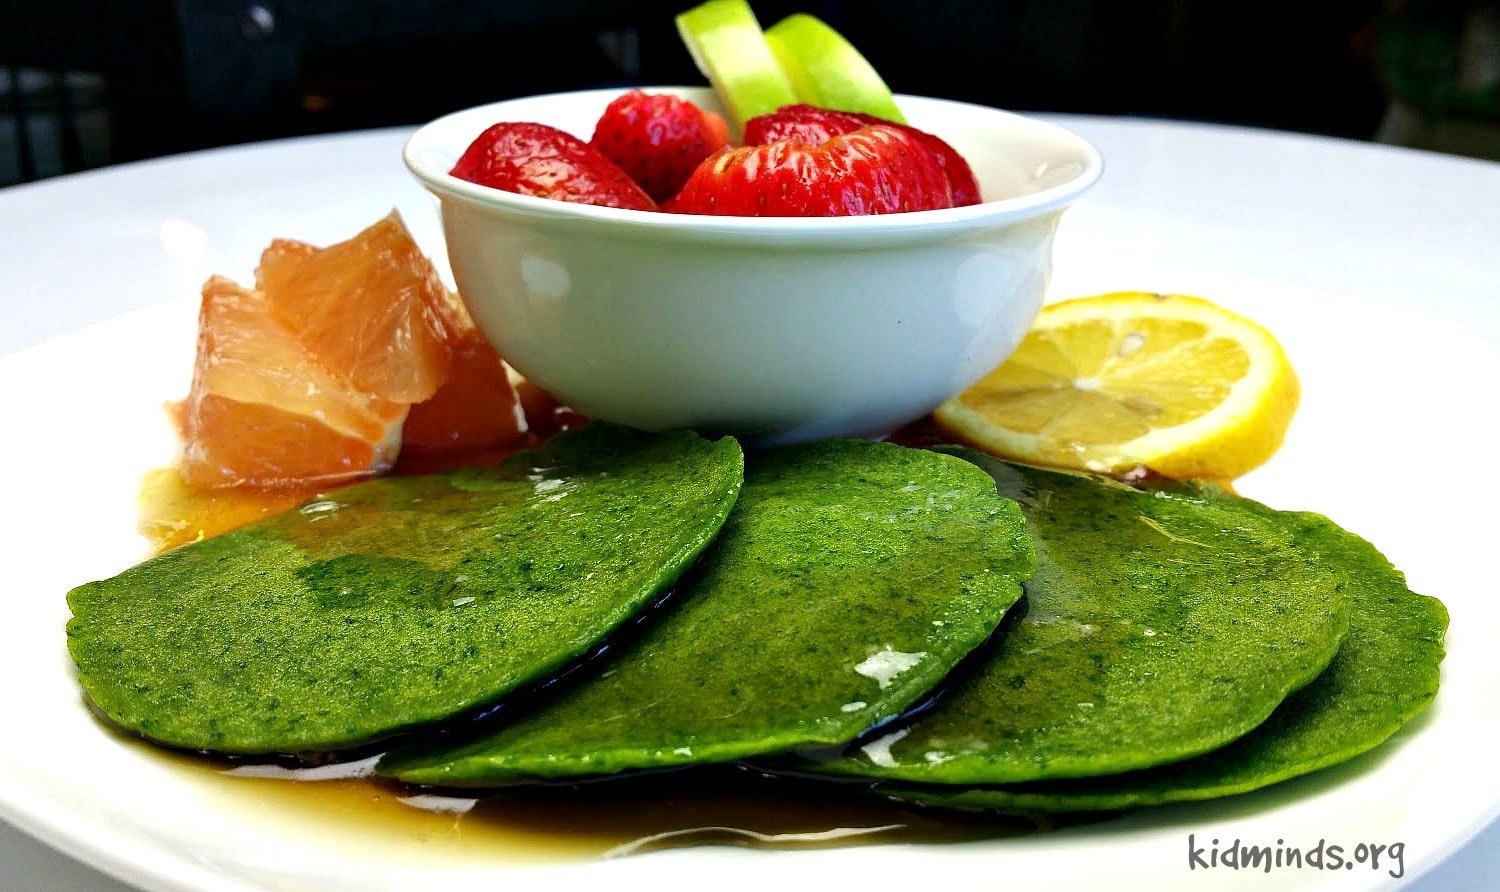 Green Pancakes without artificial colorings.  The rich green color comes from fresh and nutritious spinach.  Enjoy them on St. Patrick's Day or any other day of the year!